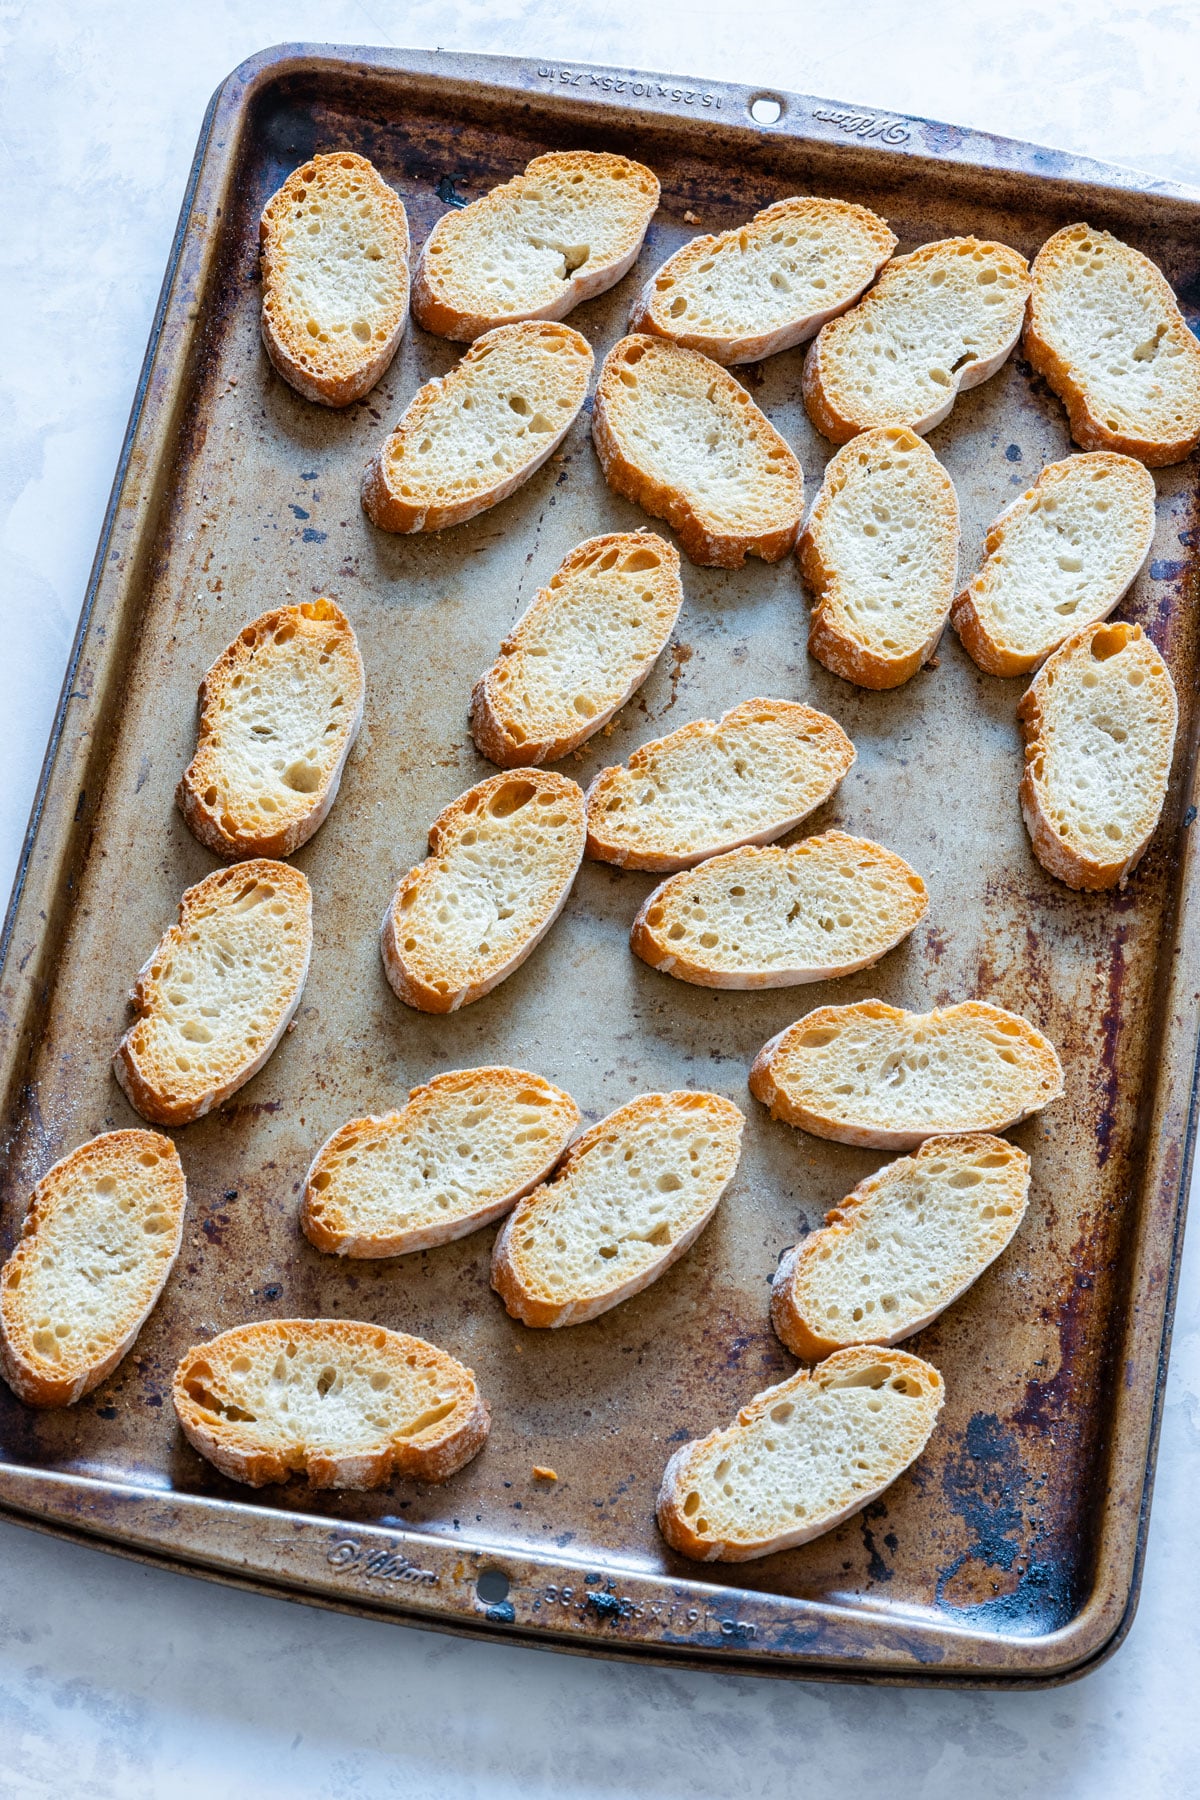 Toasted crostini on a baking tray.